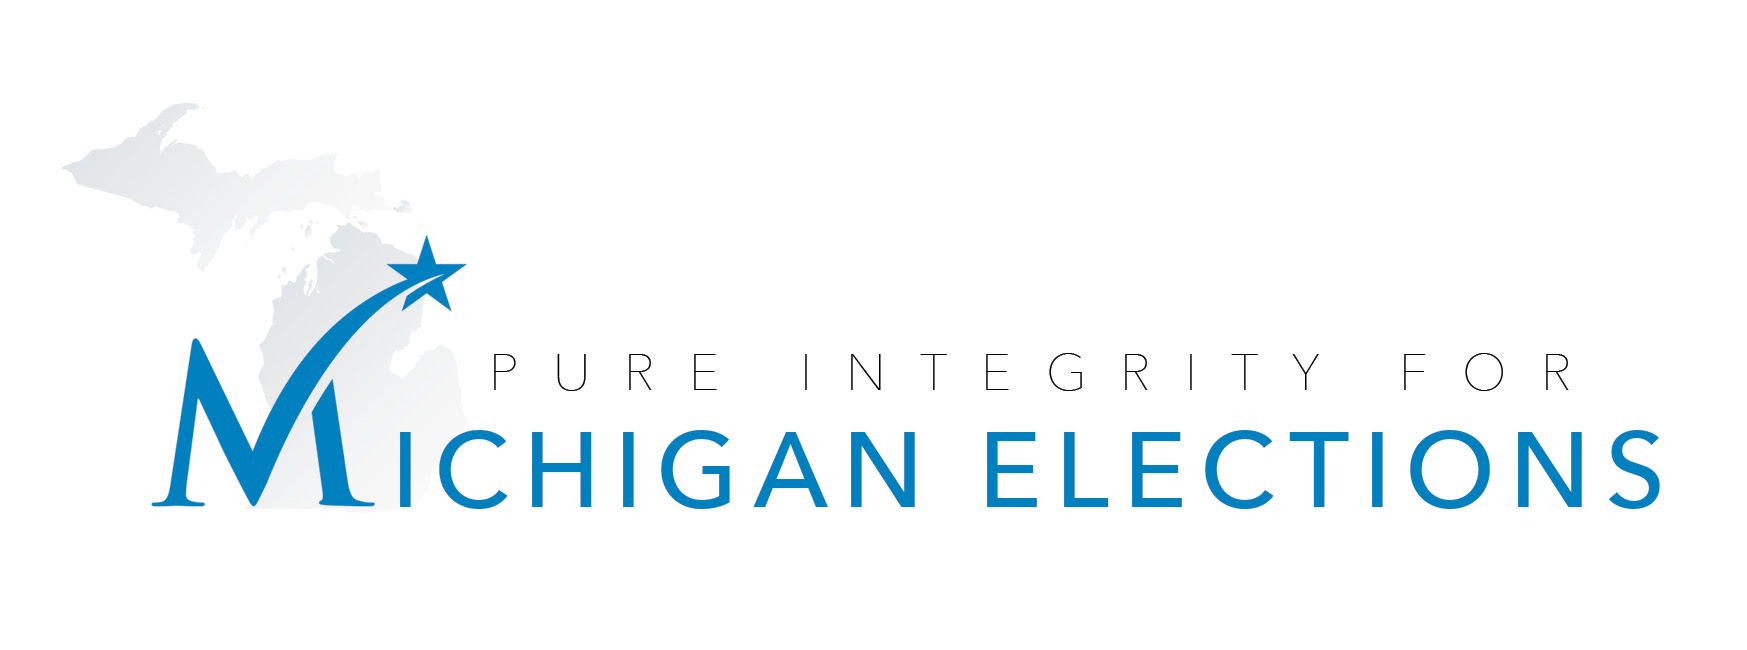 Pure Integrity for Michigan Elections